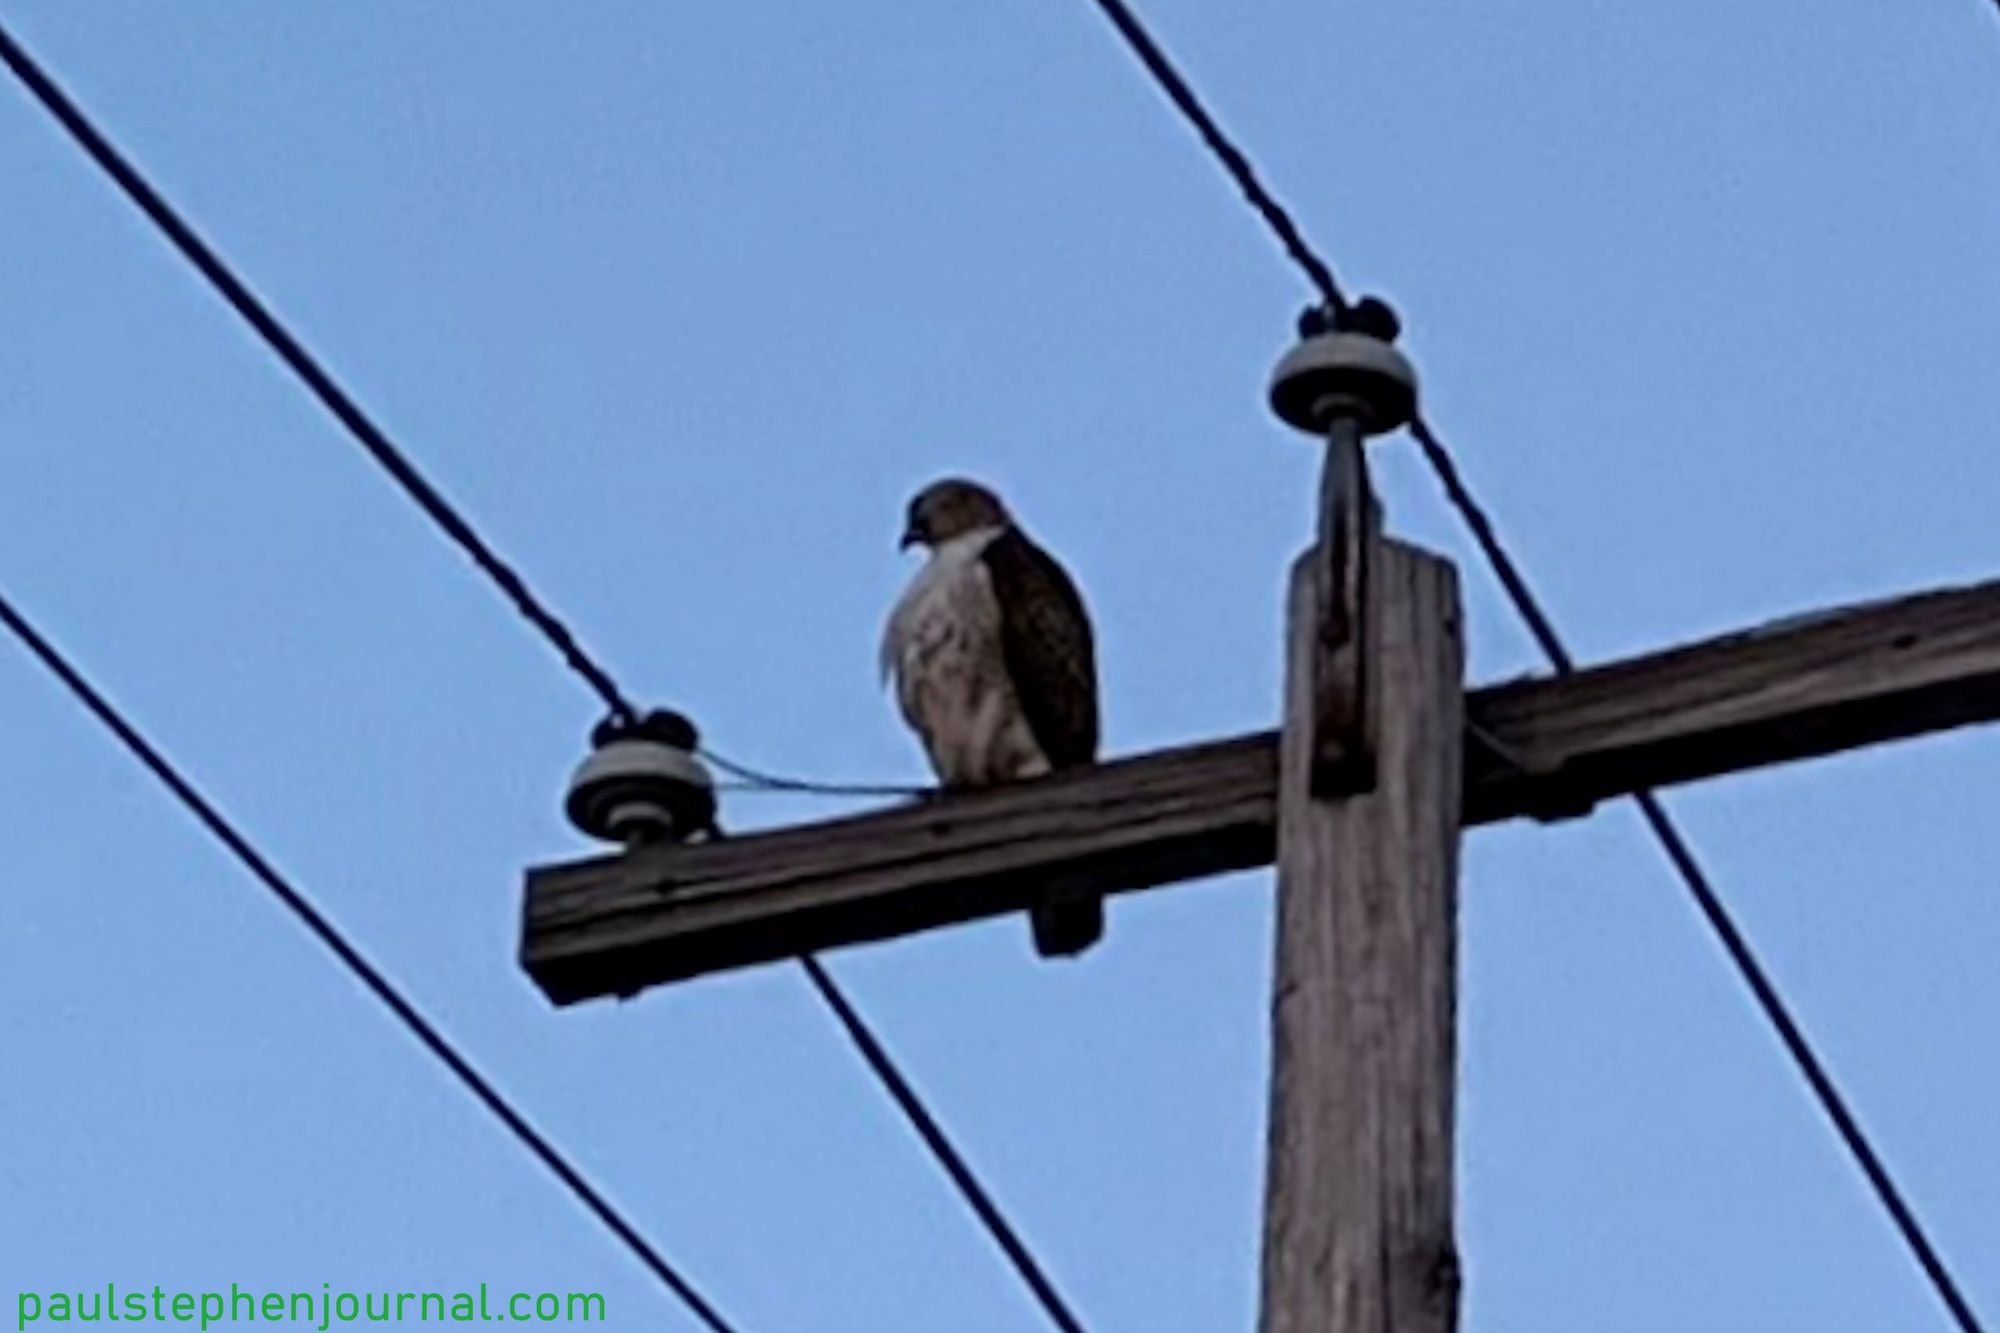 Can You Identify This Bird of Prey?